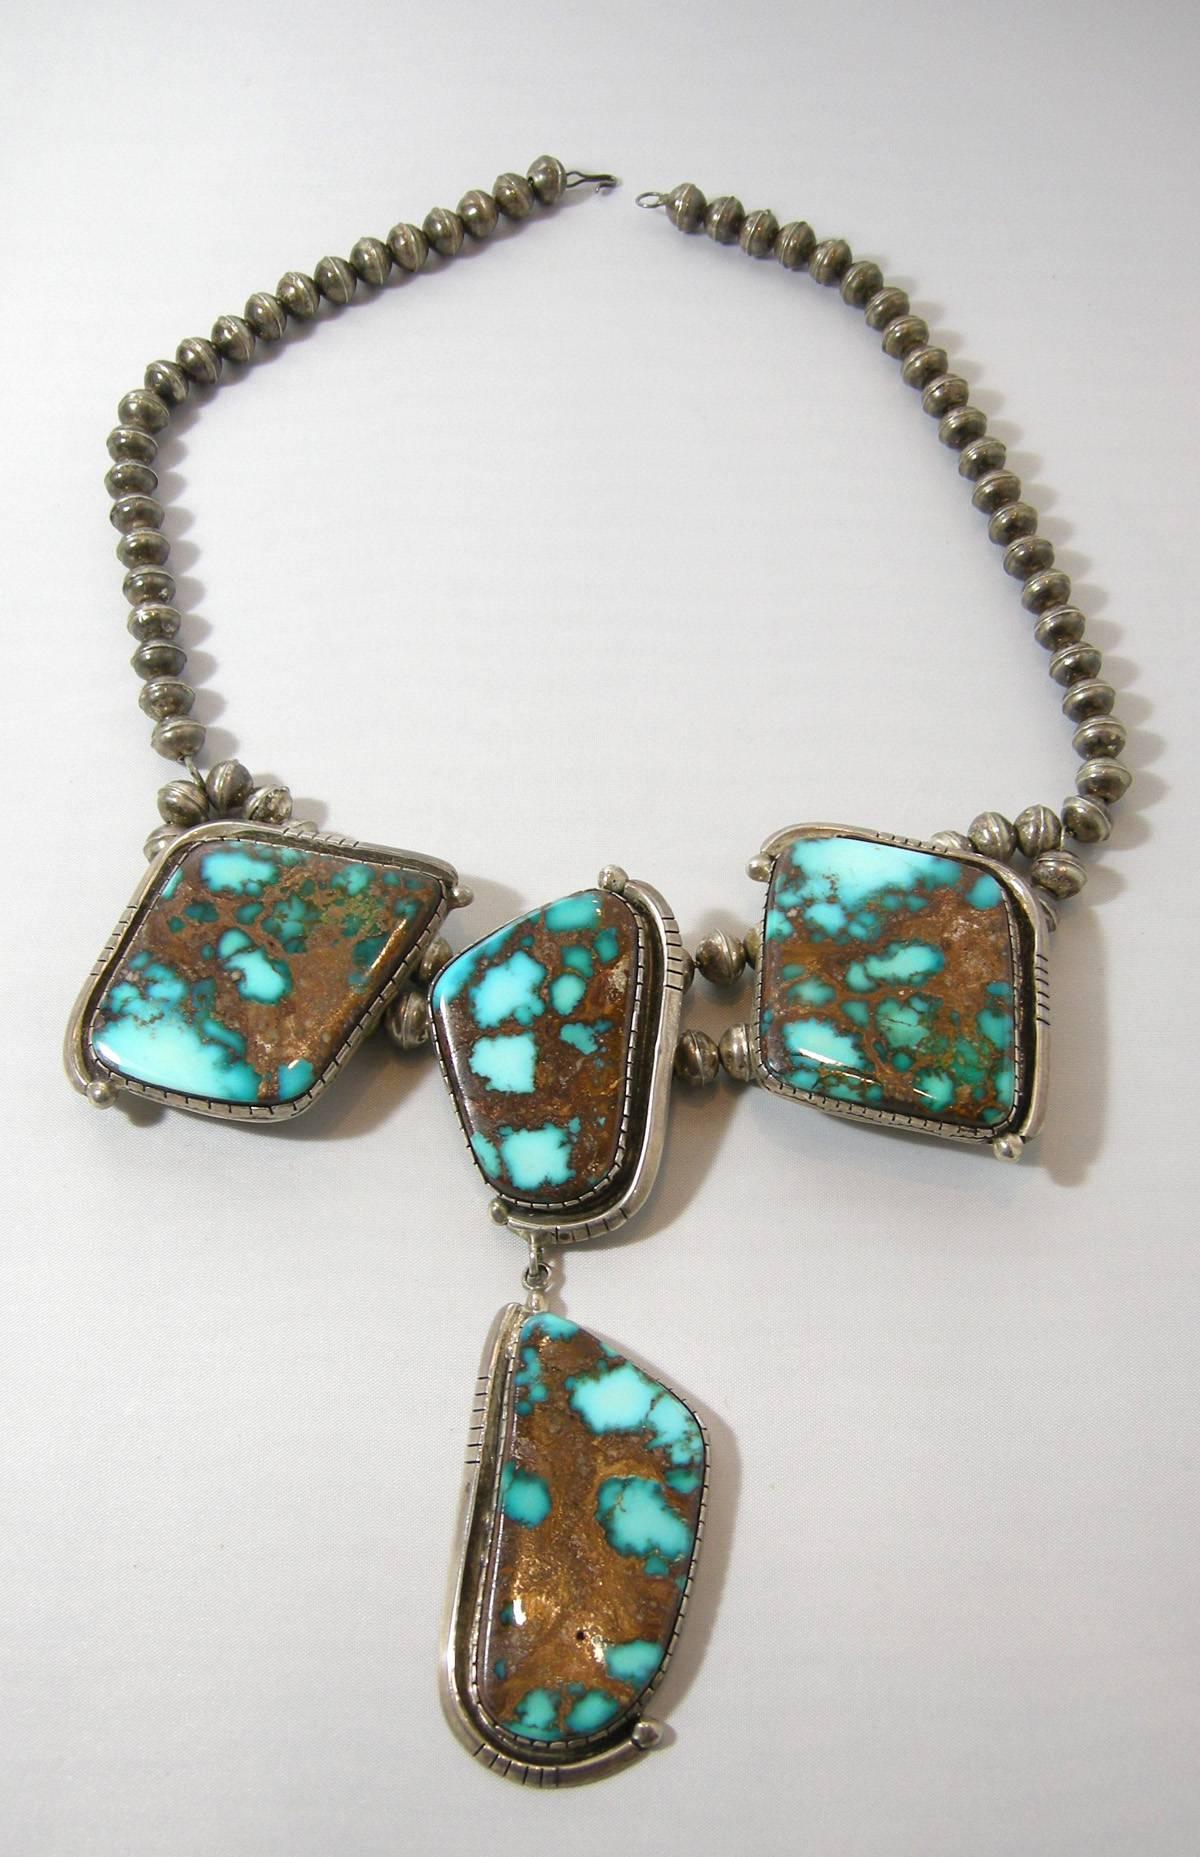 This is a very rare necklace because of the Morenci Turquoise stones.  It has sterling silver beads leading down to the main centerpiece where the back is double beaded.  The centerpiece three different shaped Morenci stones bezel into an ornate